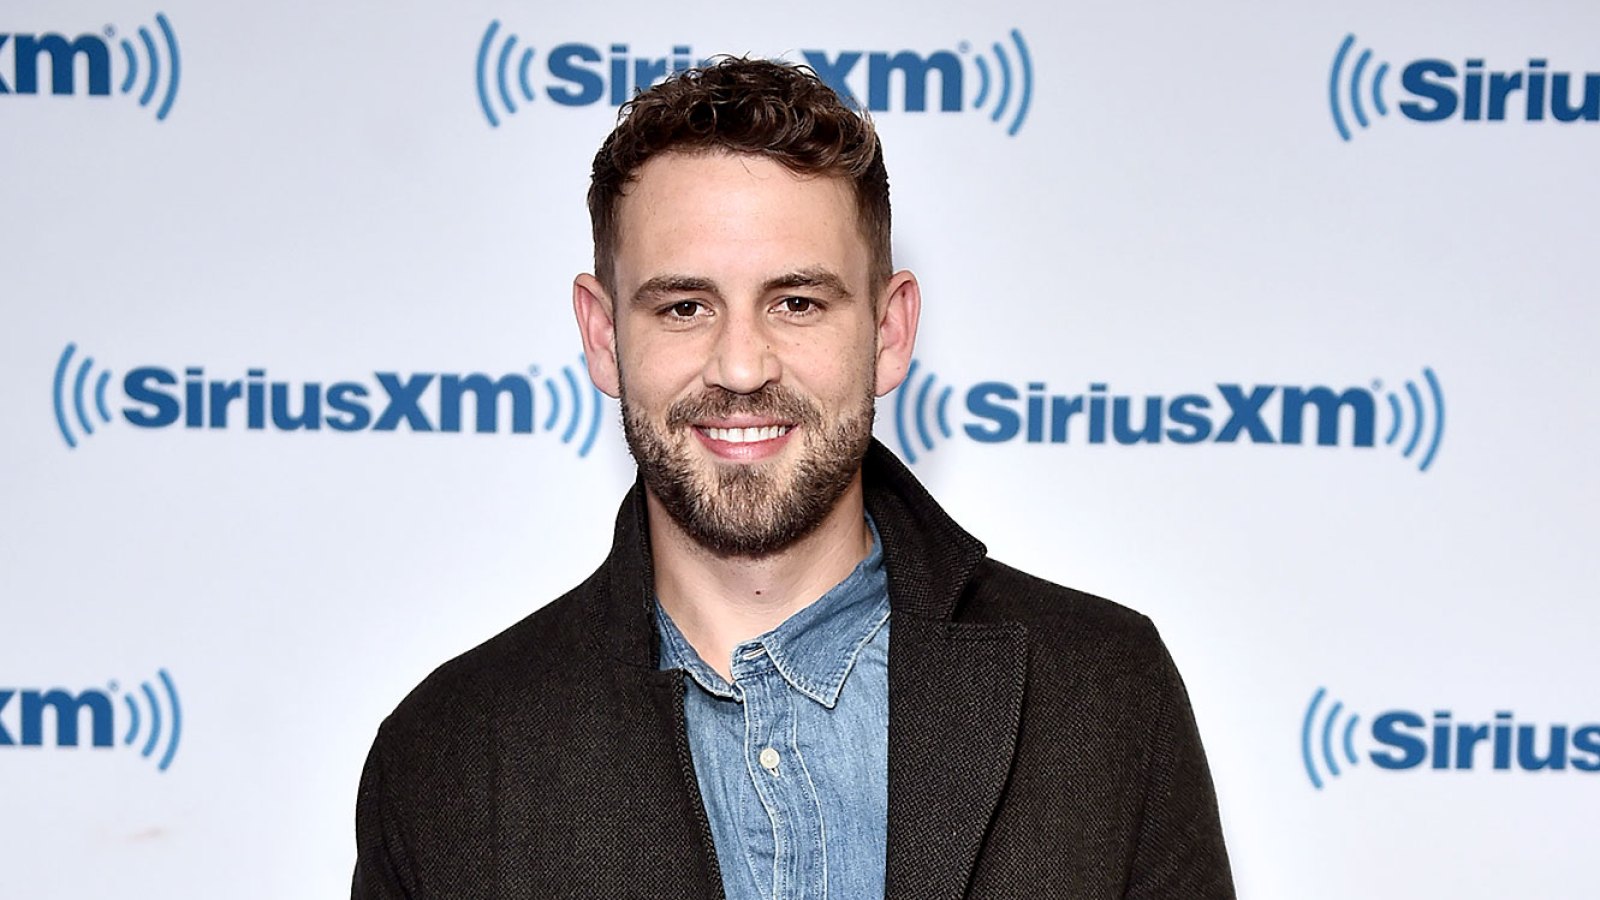 LOL! Nick Viall Slams Love in New Halo Top Commercial